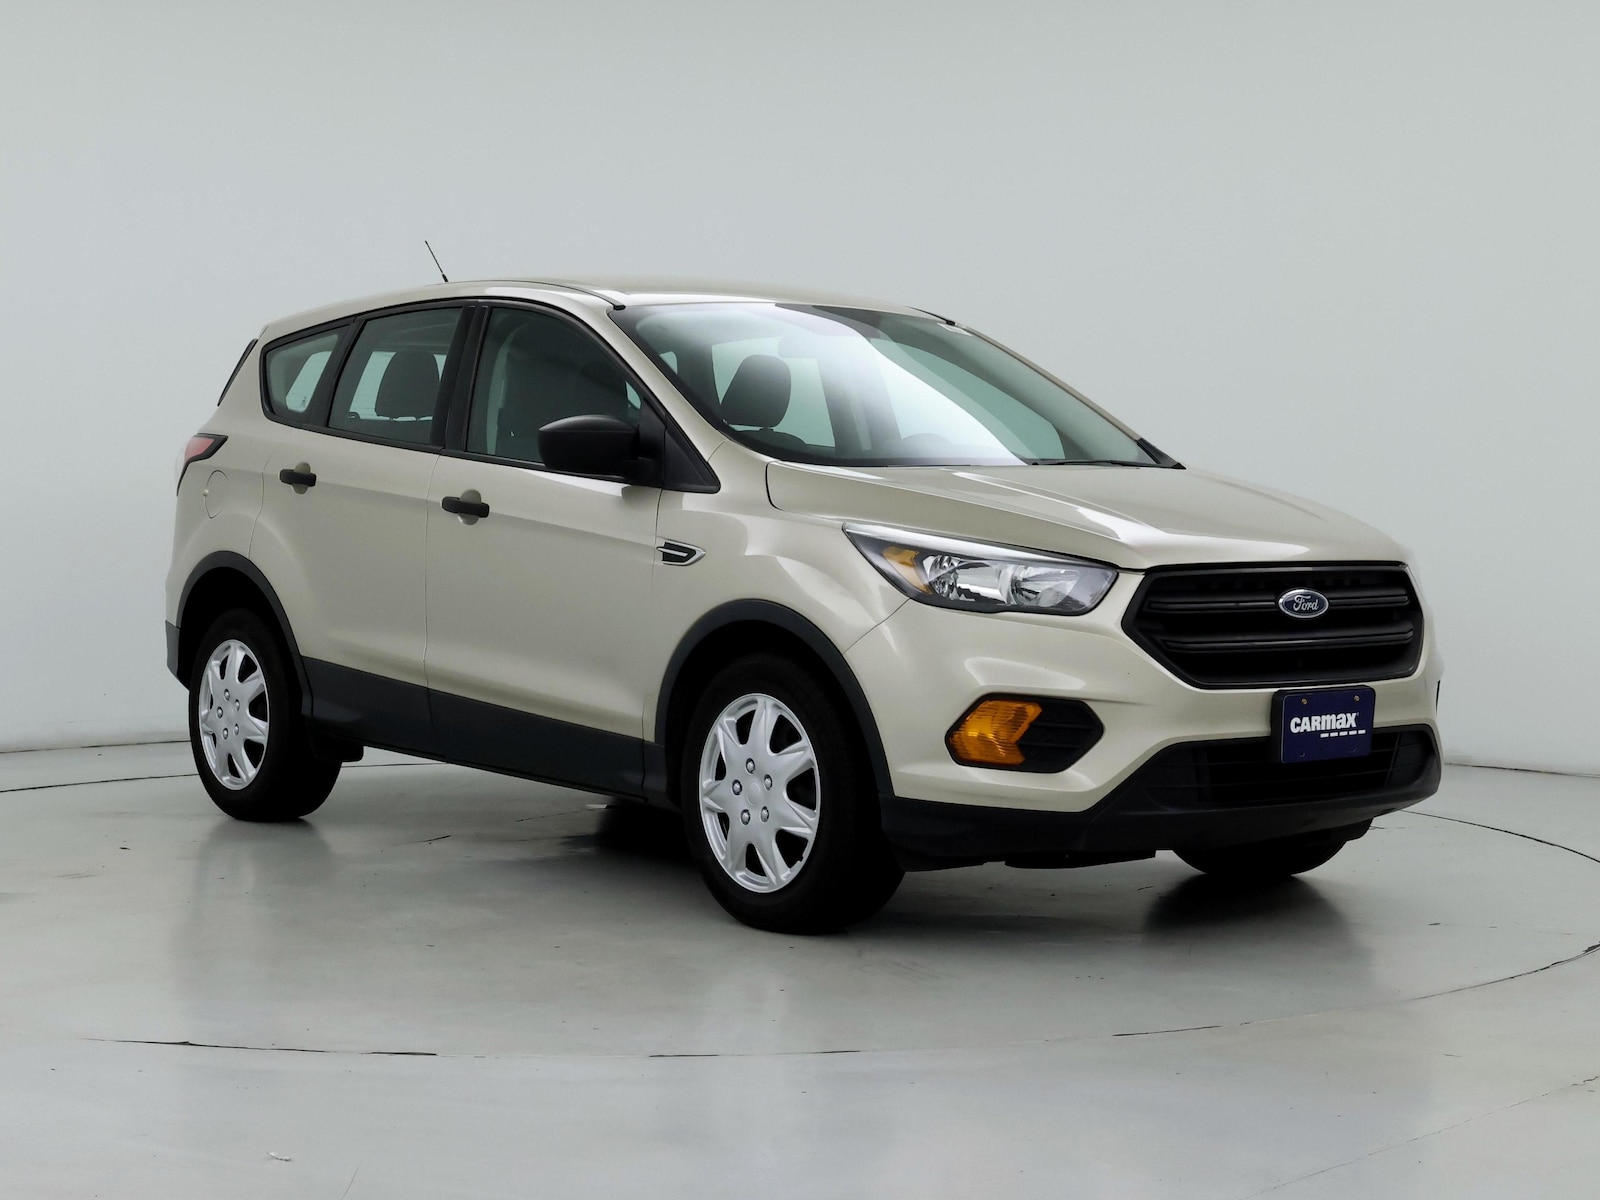 Used 2018 Ford Escape S with VIN 1FMCU0F76JUC18925 for sale in Spokane Valley, WA